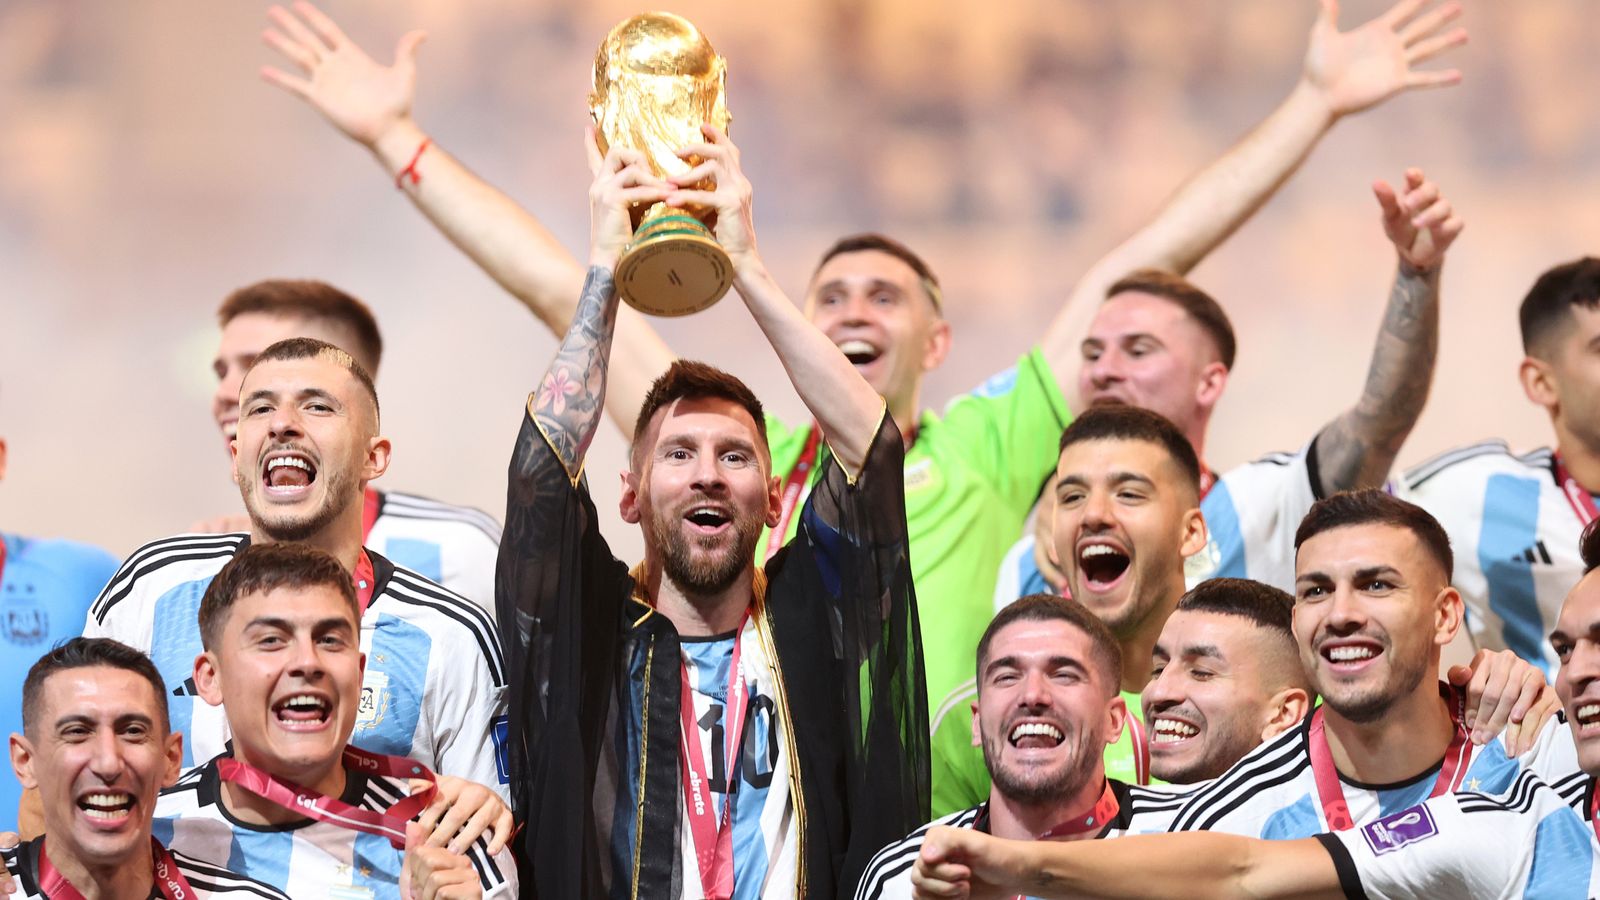 FIFA World Cup 2022 awards— Messi, Mbappe, and Emi Martinez win